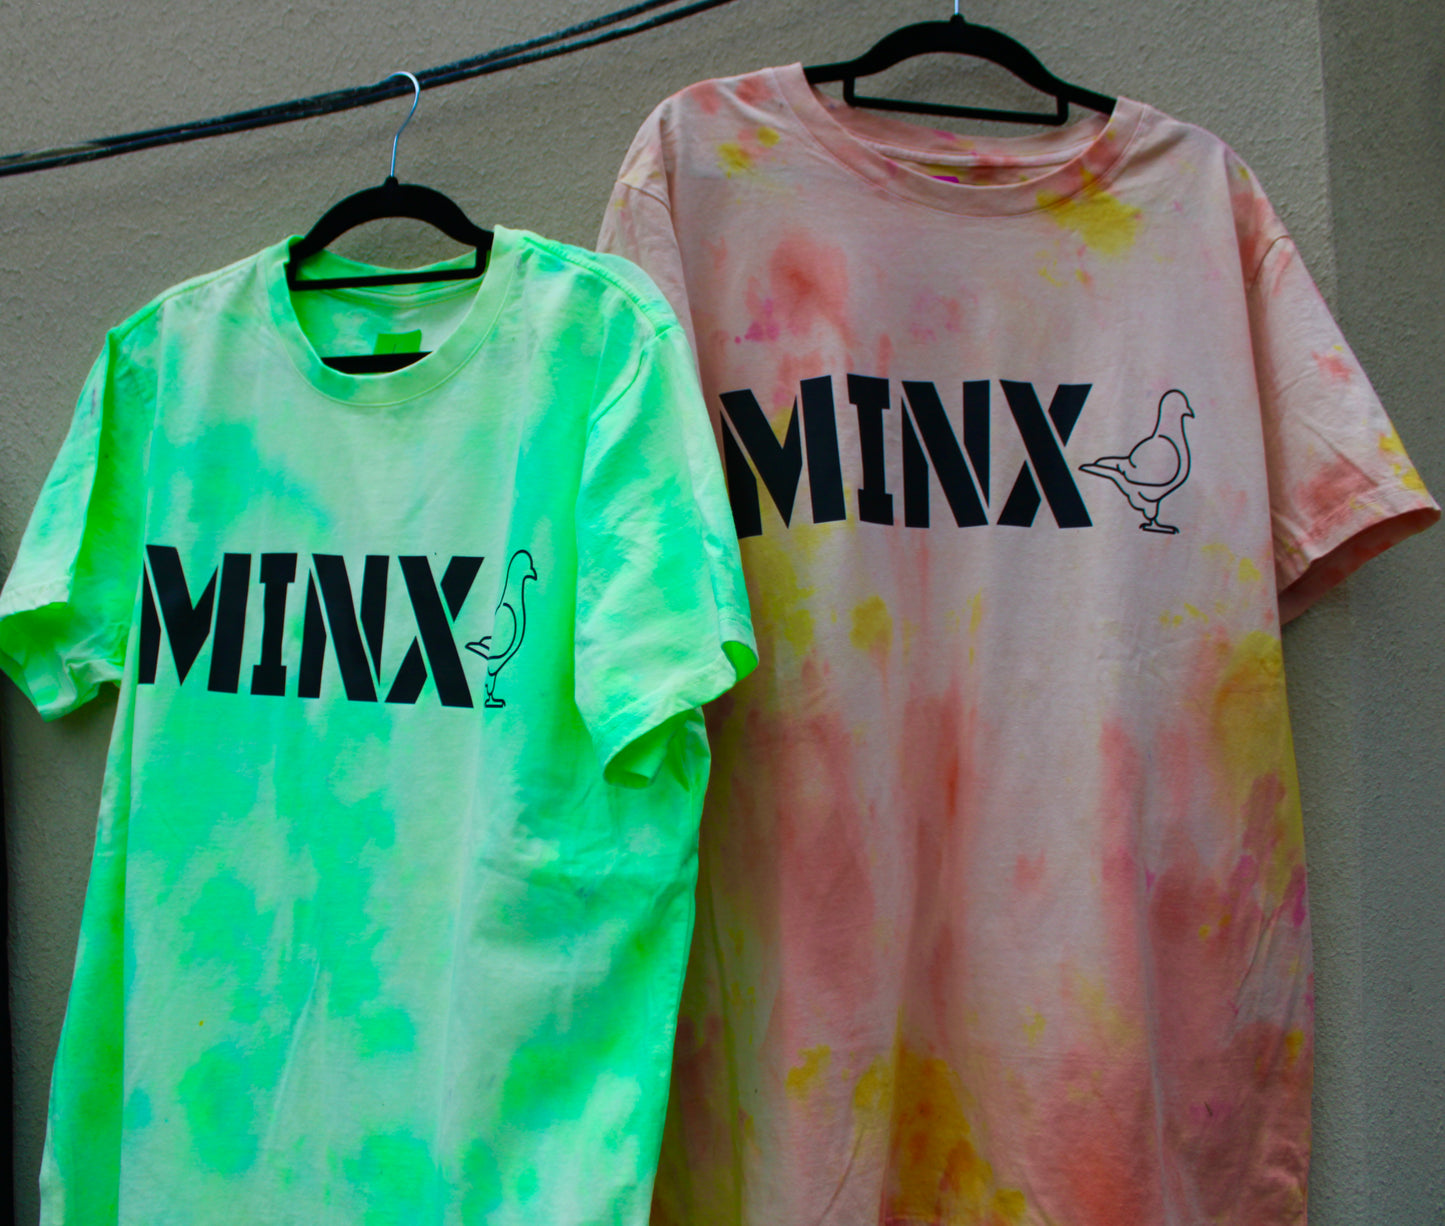 LIMITED EDITION HAND DYED TIE DYE